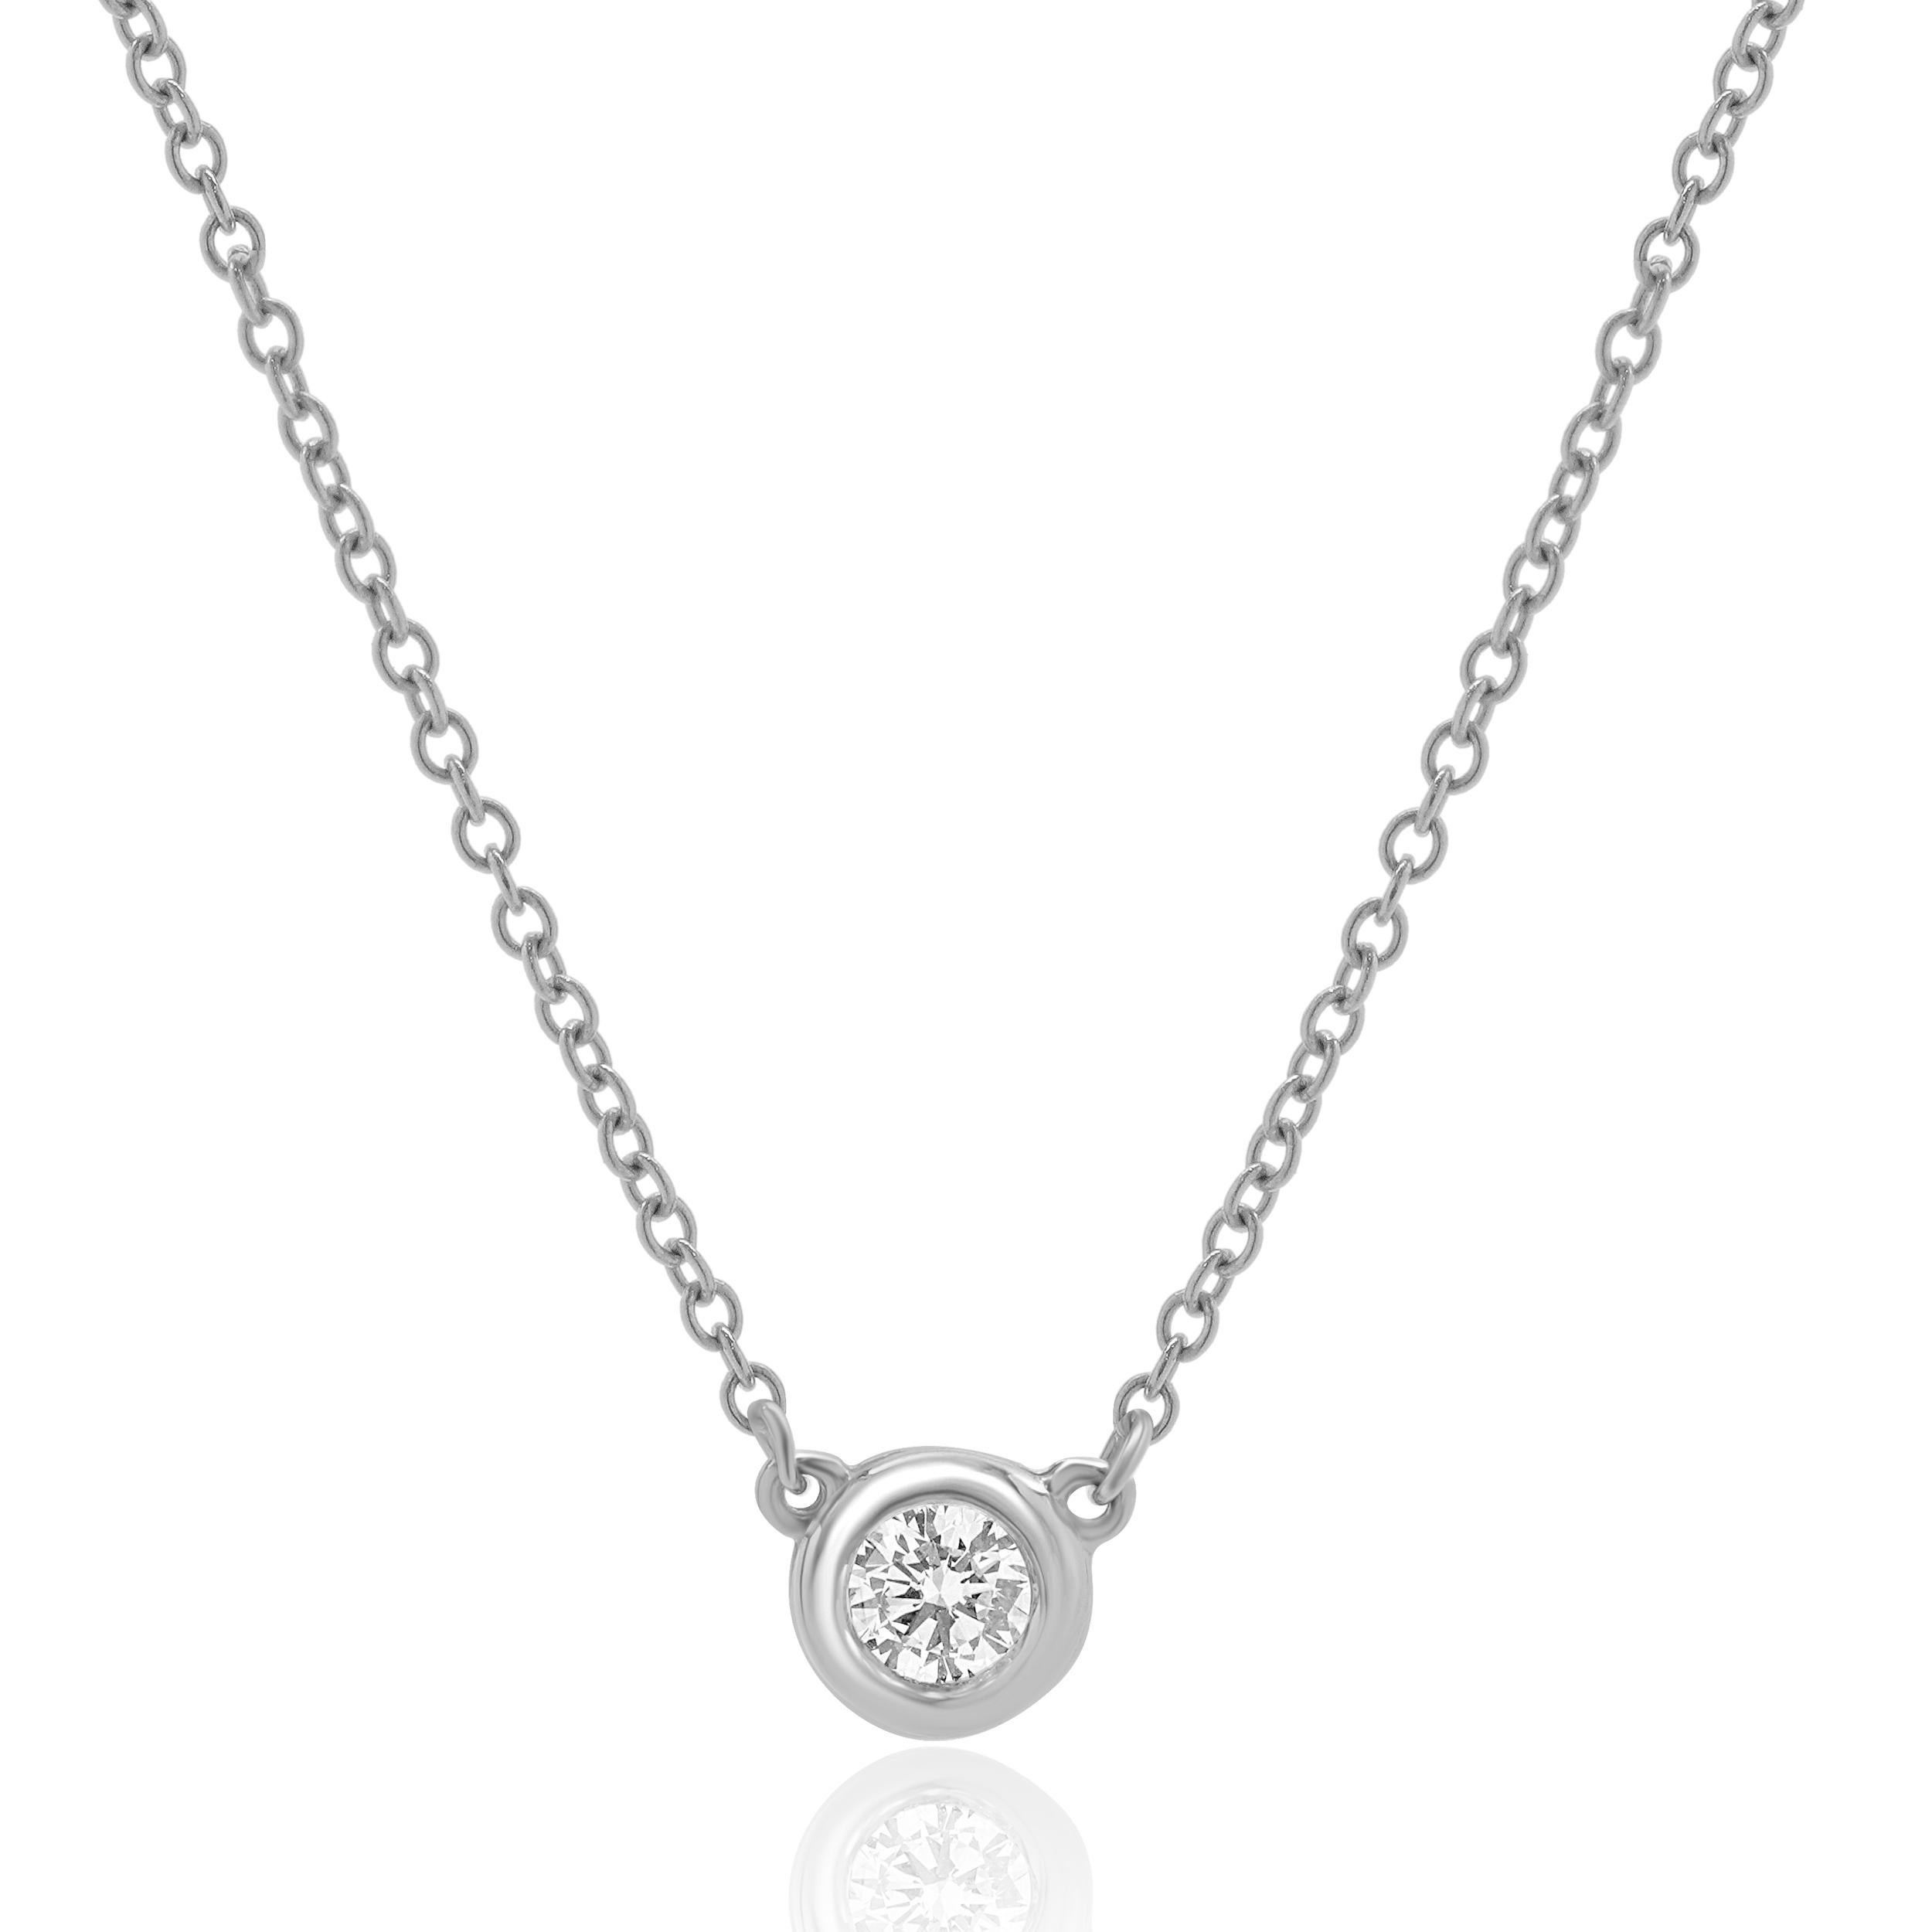 Designer: custom
Material: 14K white gold
Diamonds: 1 round brilliant = 0.20cttw
Color: I
Clarity:SI1
Dimensions: necklace measures 18-inches in length 
Weight: 2.27 grams
